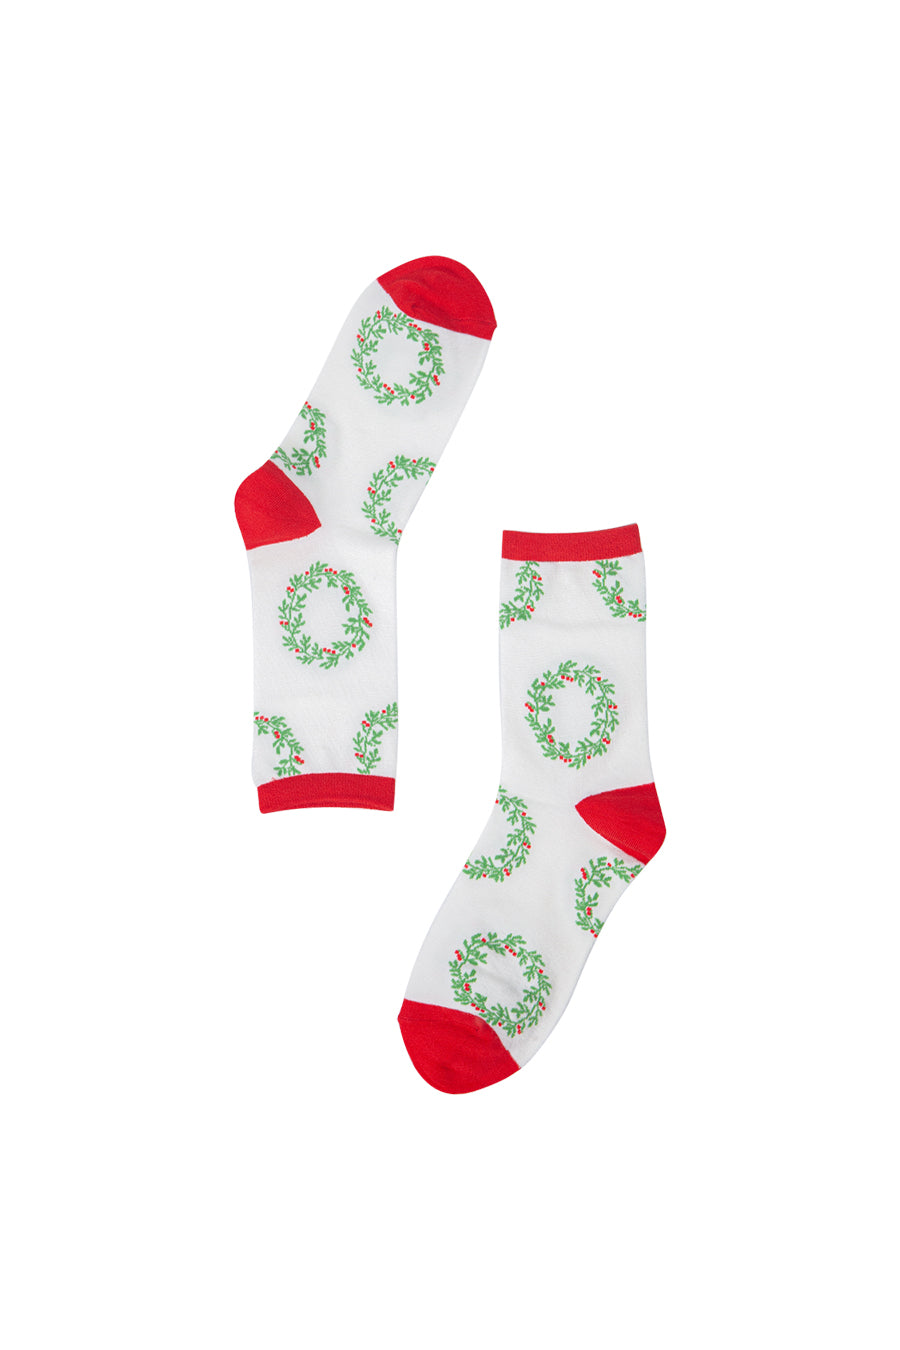 white, red, green ankle socks with an xmas floral wreath pattern